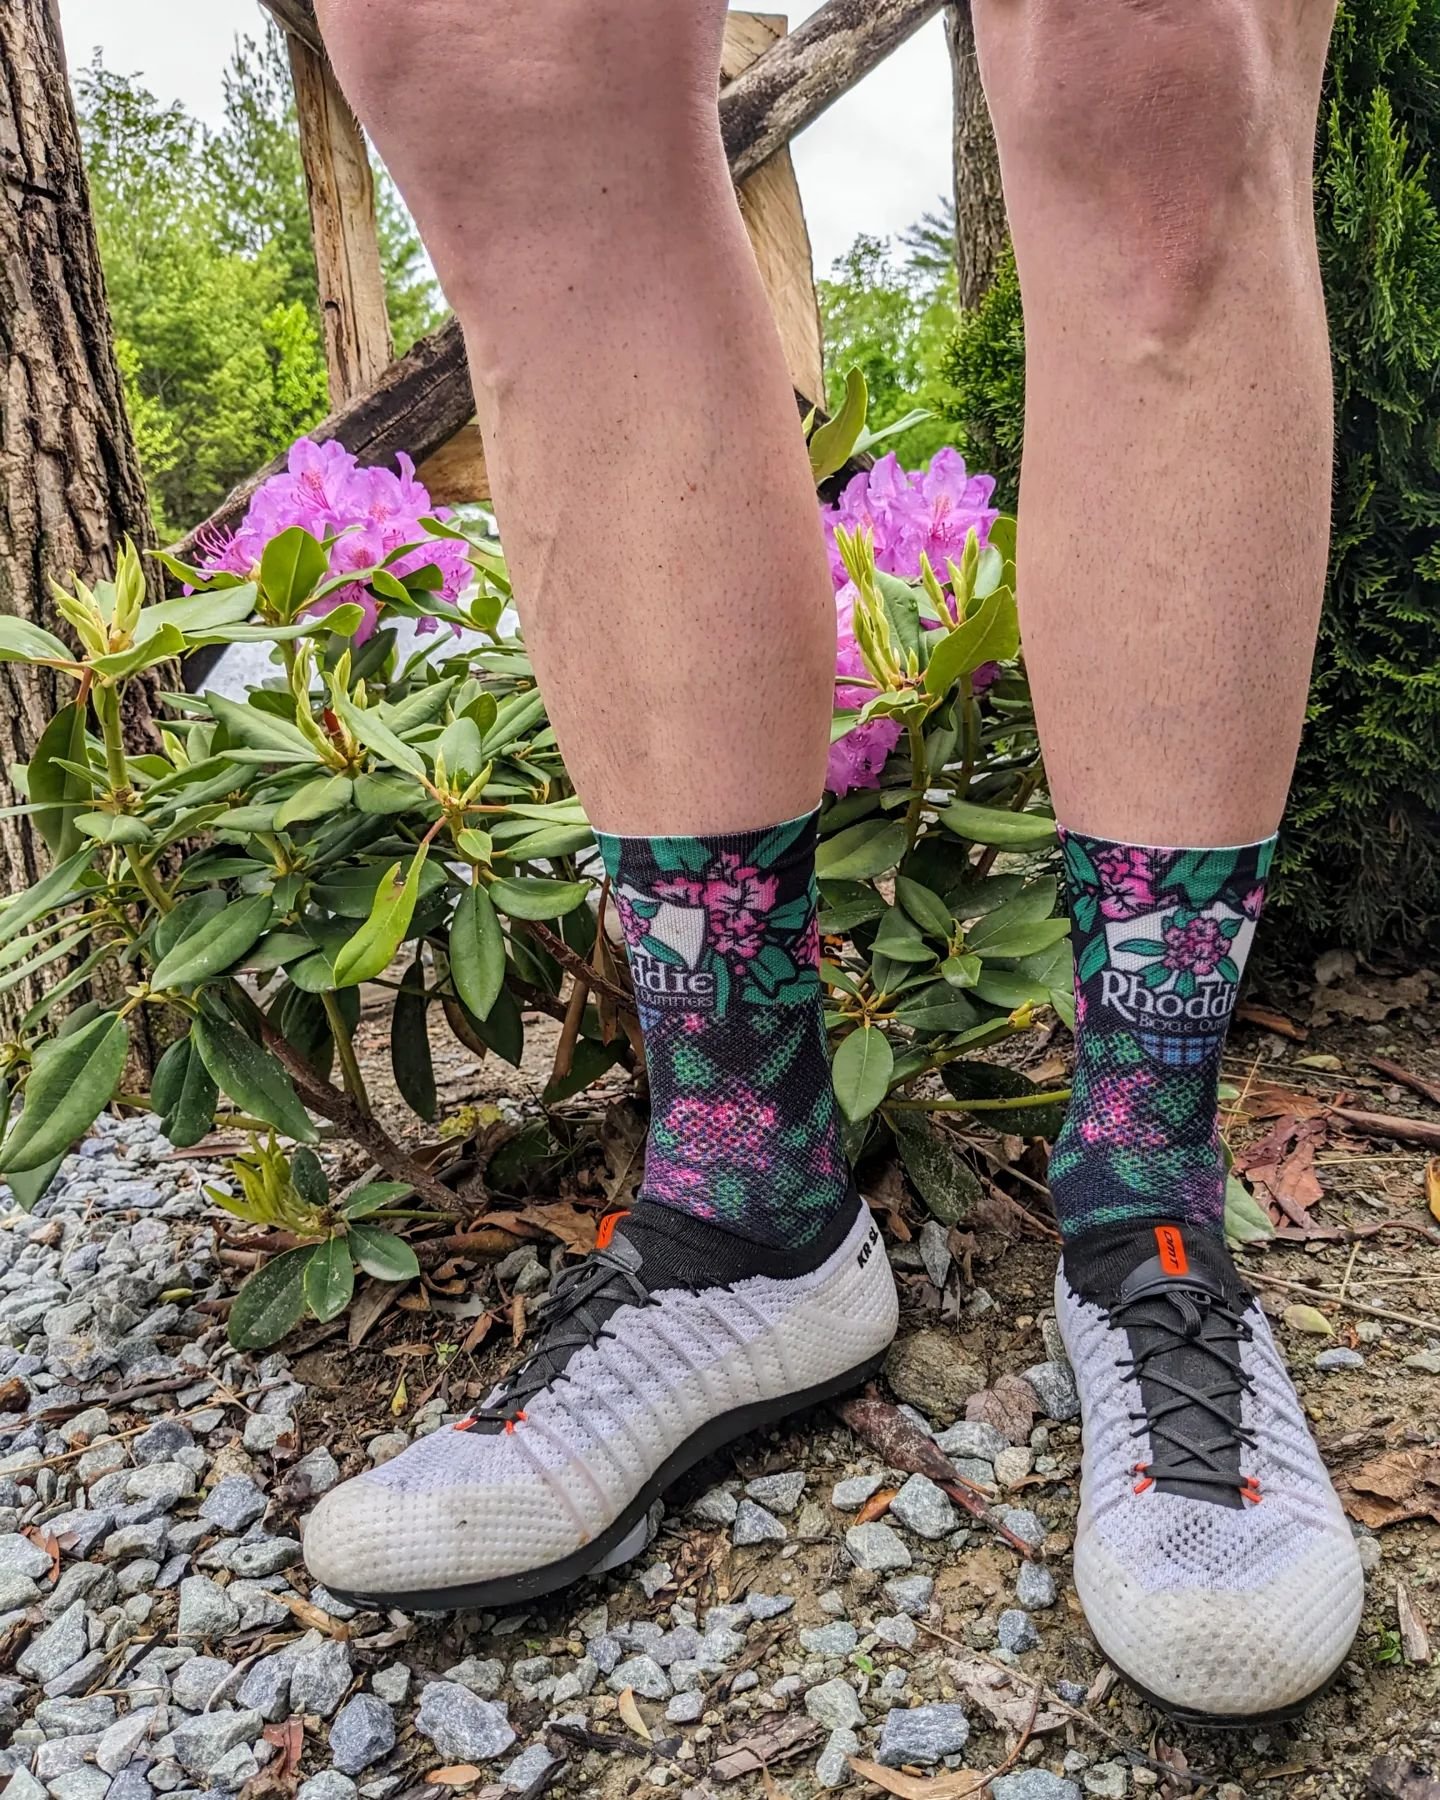 In good company, blooming Catawba Rhododendron &amp; Defeet Cycling socks. The world's finest cycling socks made right here in North Carolina. Pictured are some limited edition socks sublimated and personally delivered for our 3T Experience Week even